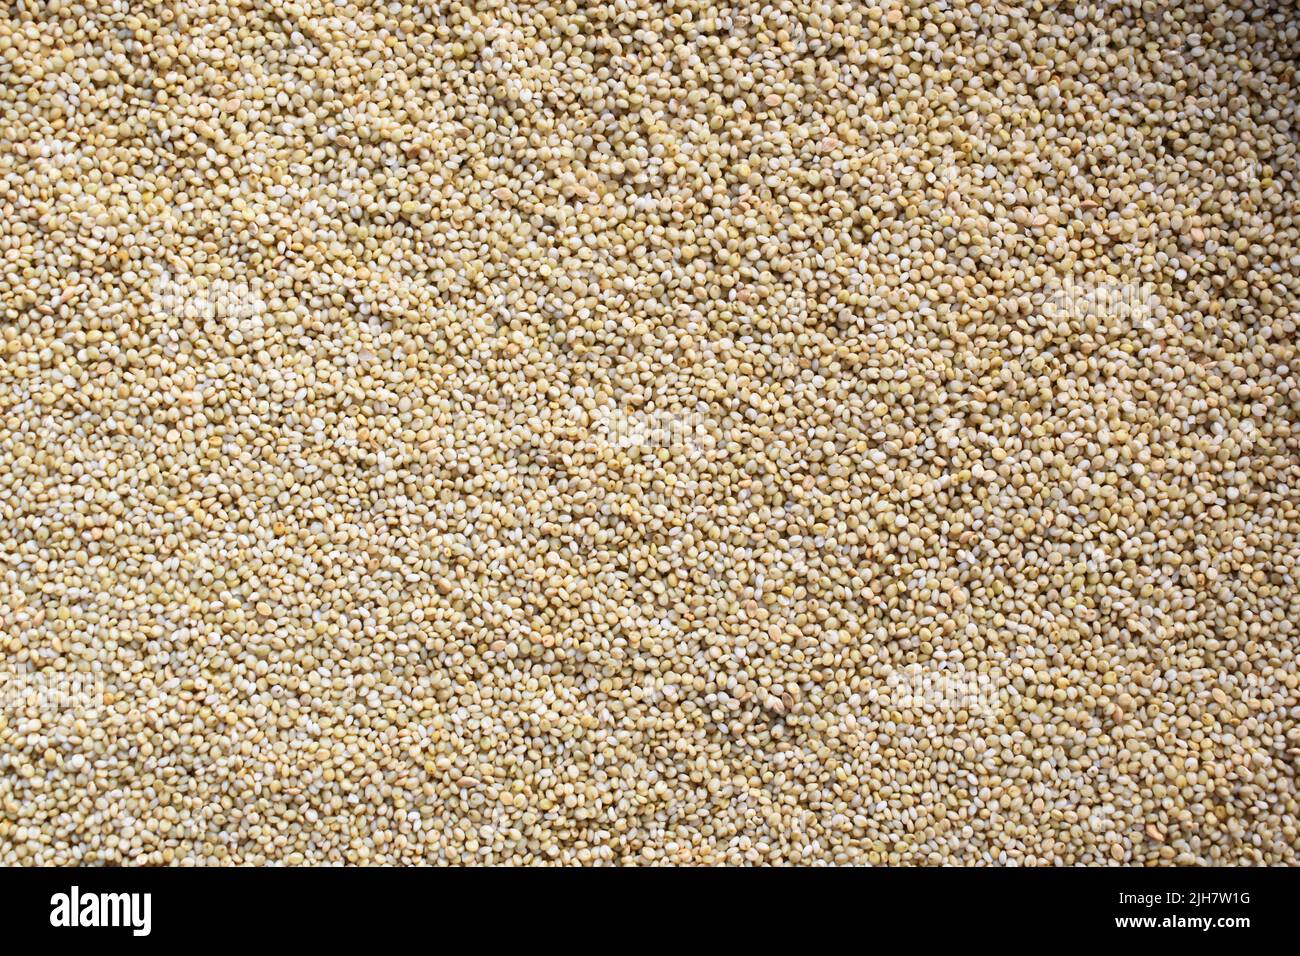 Raw whole dried Brown top millet cereal grain Stock Photo